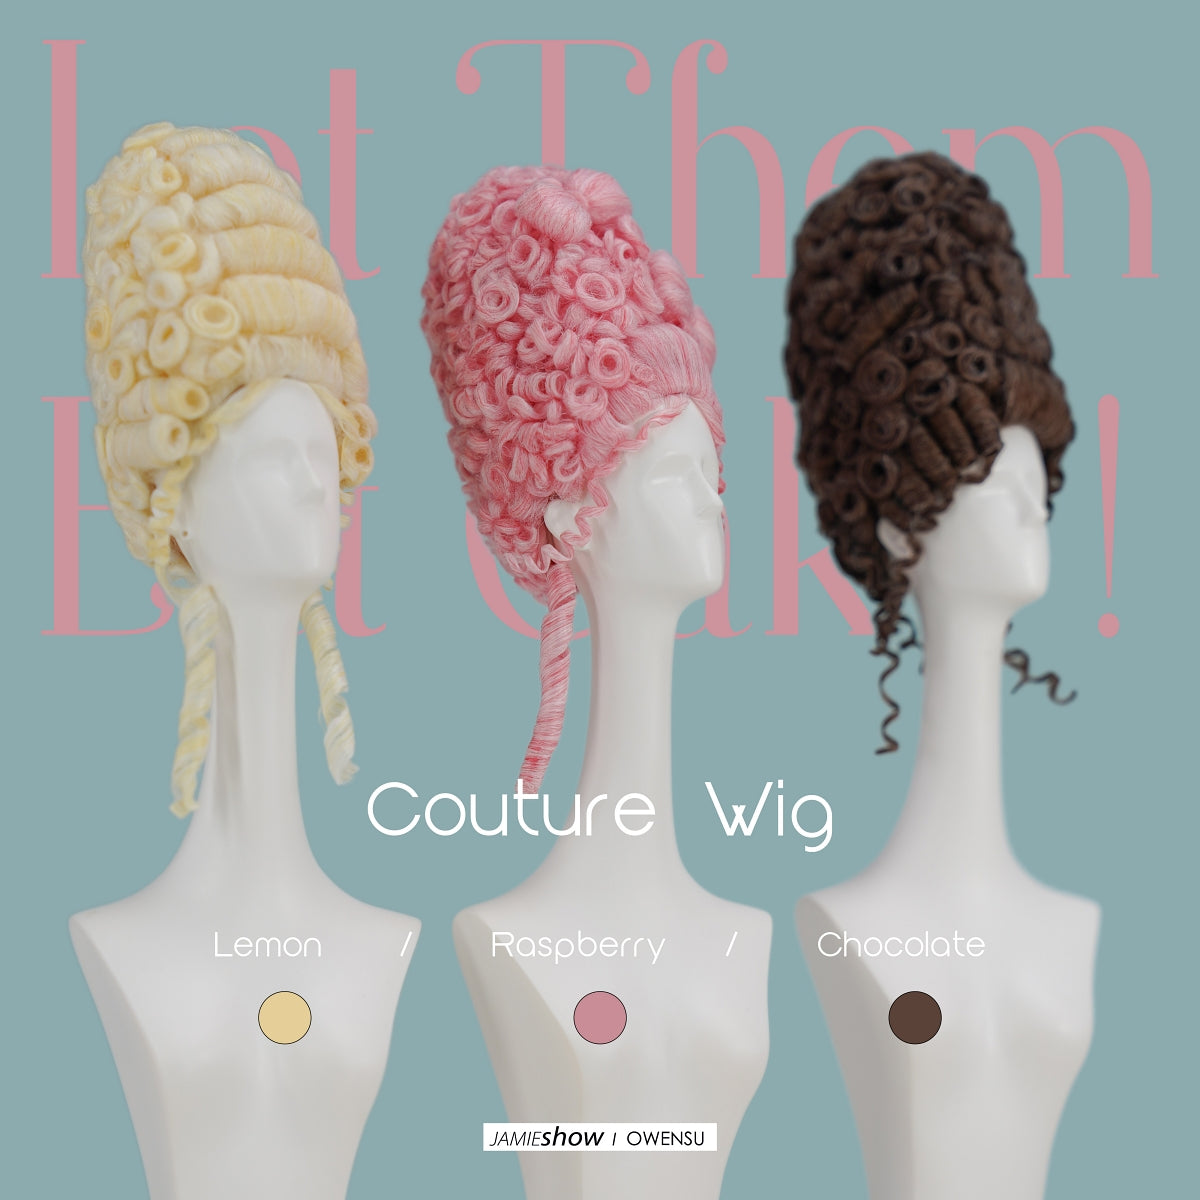 Versailles II "Let Them Eat Cake" Couture Wig Chocolate